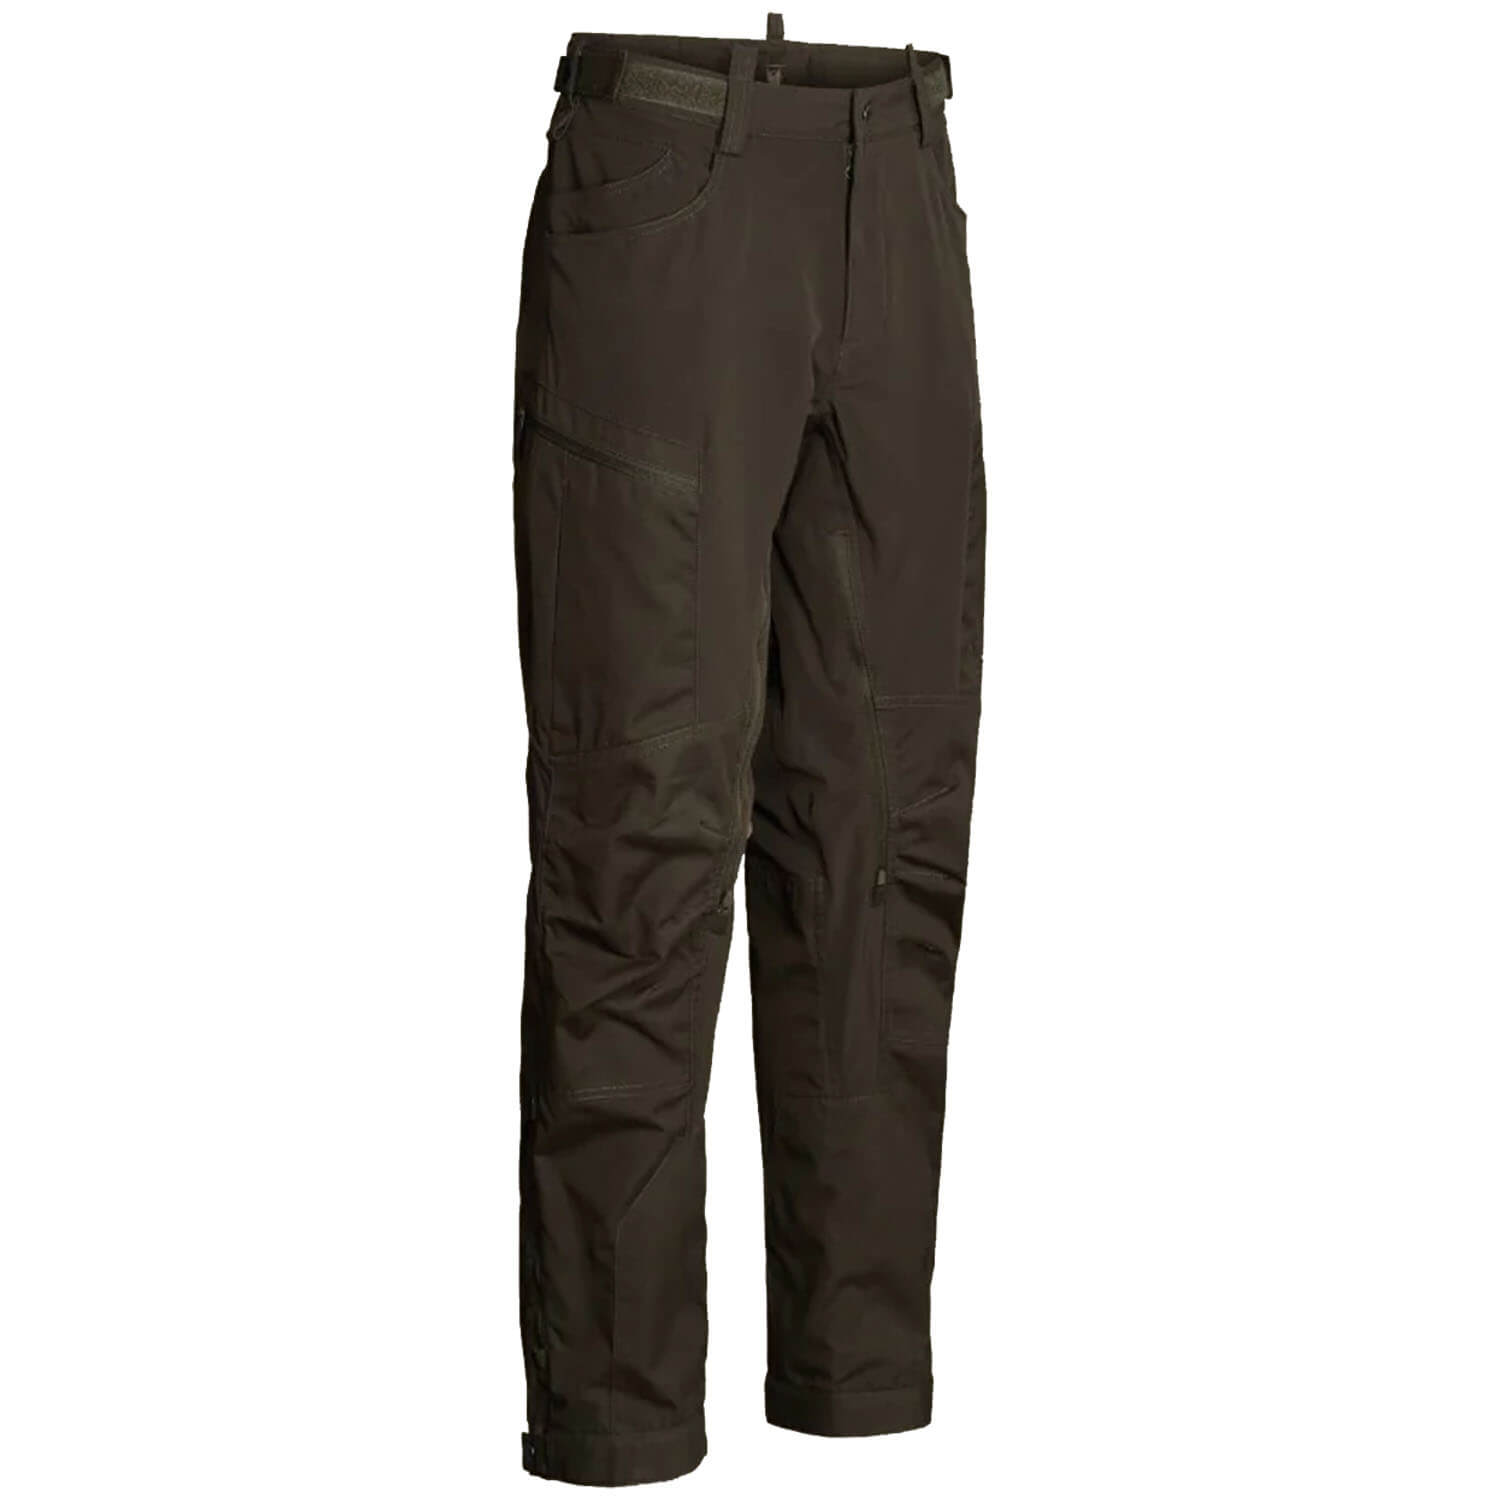 Northern Hunting trousers Trond Pro